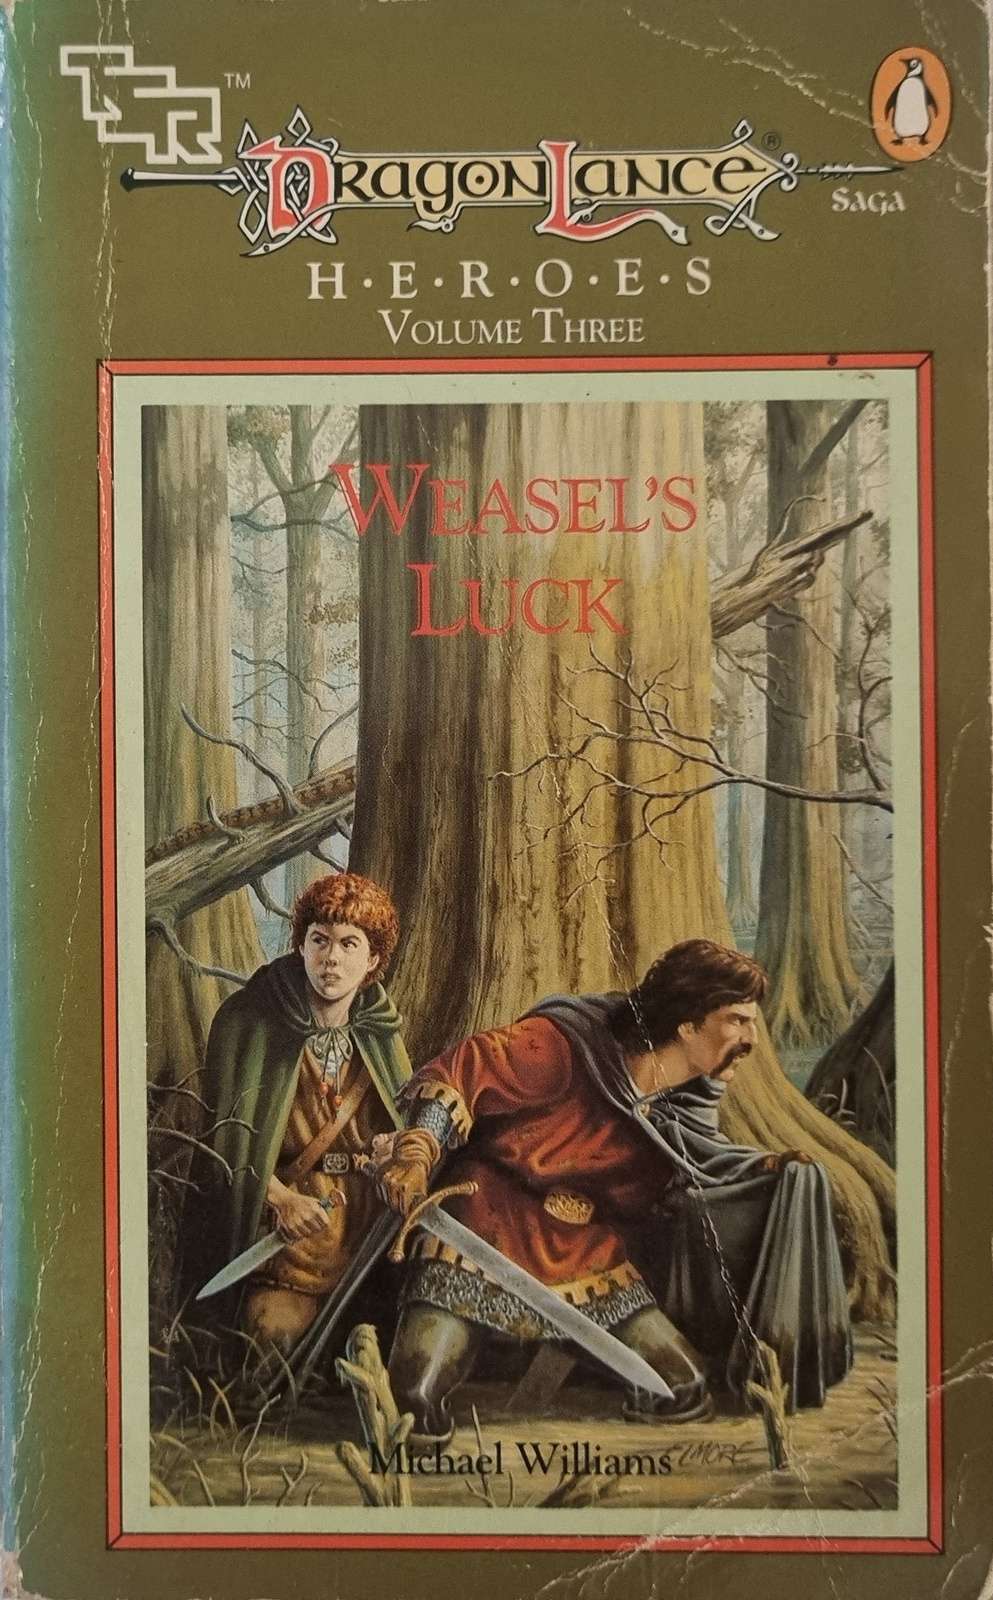 Dragonlance Heroes V3: Weasel's Luck - Michael Williams